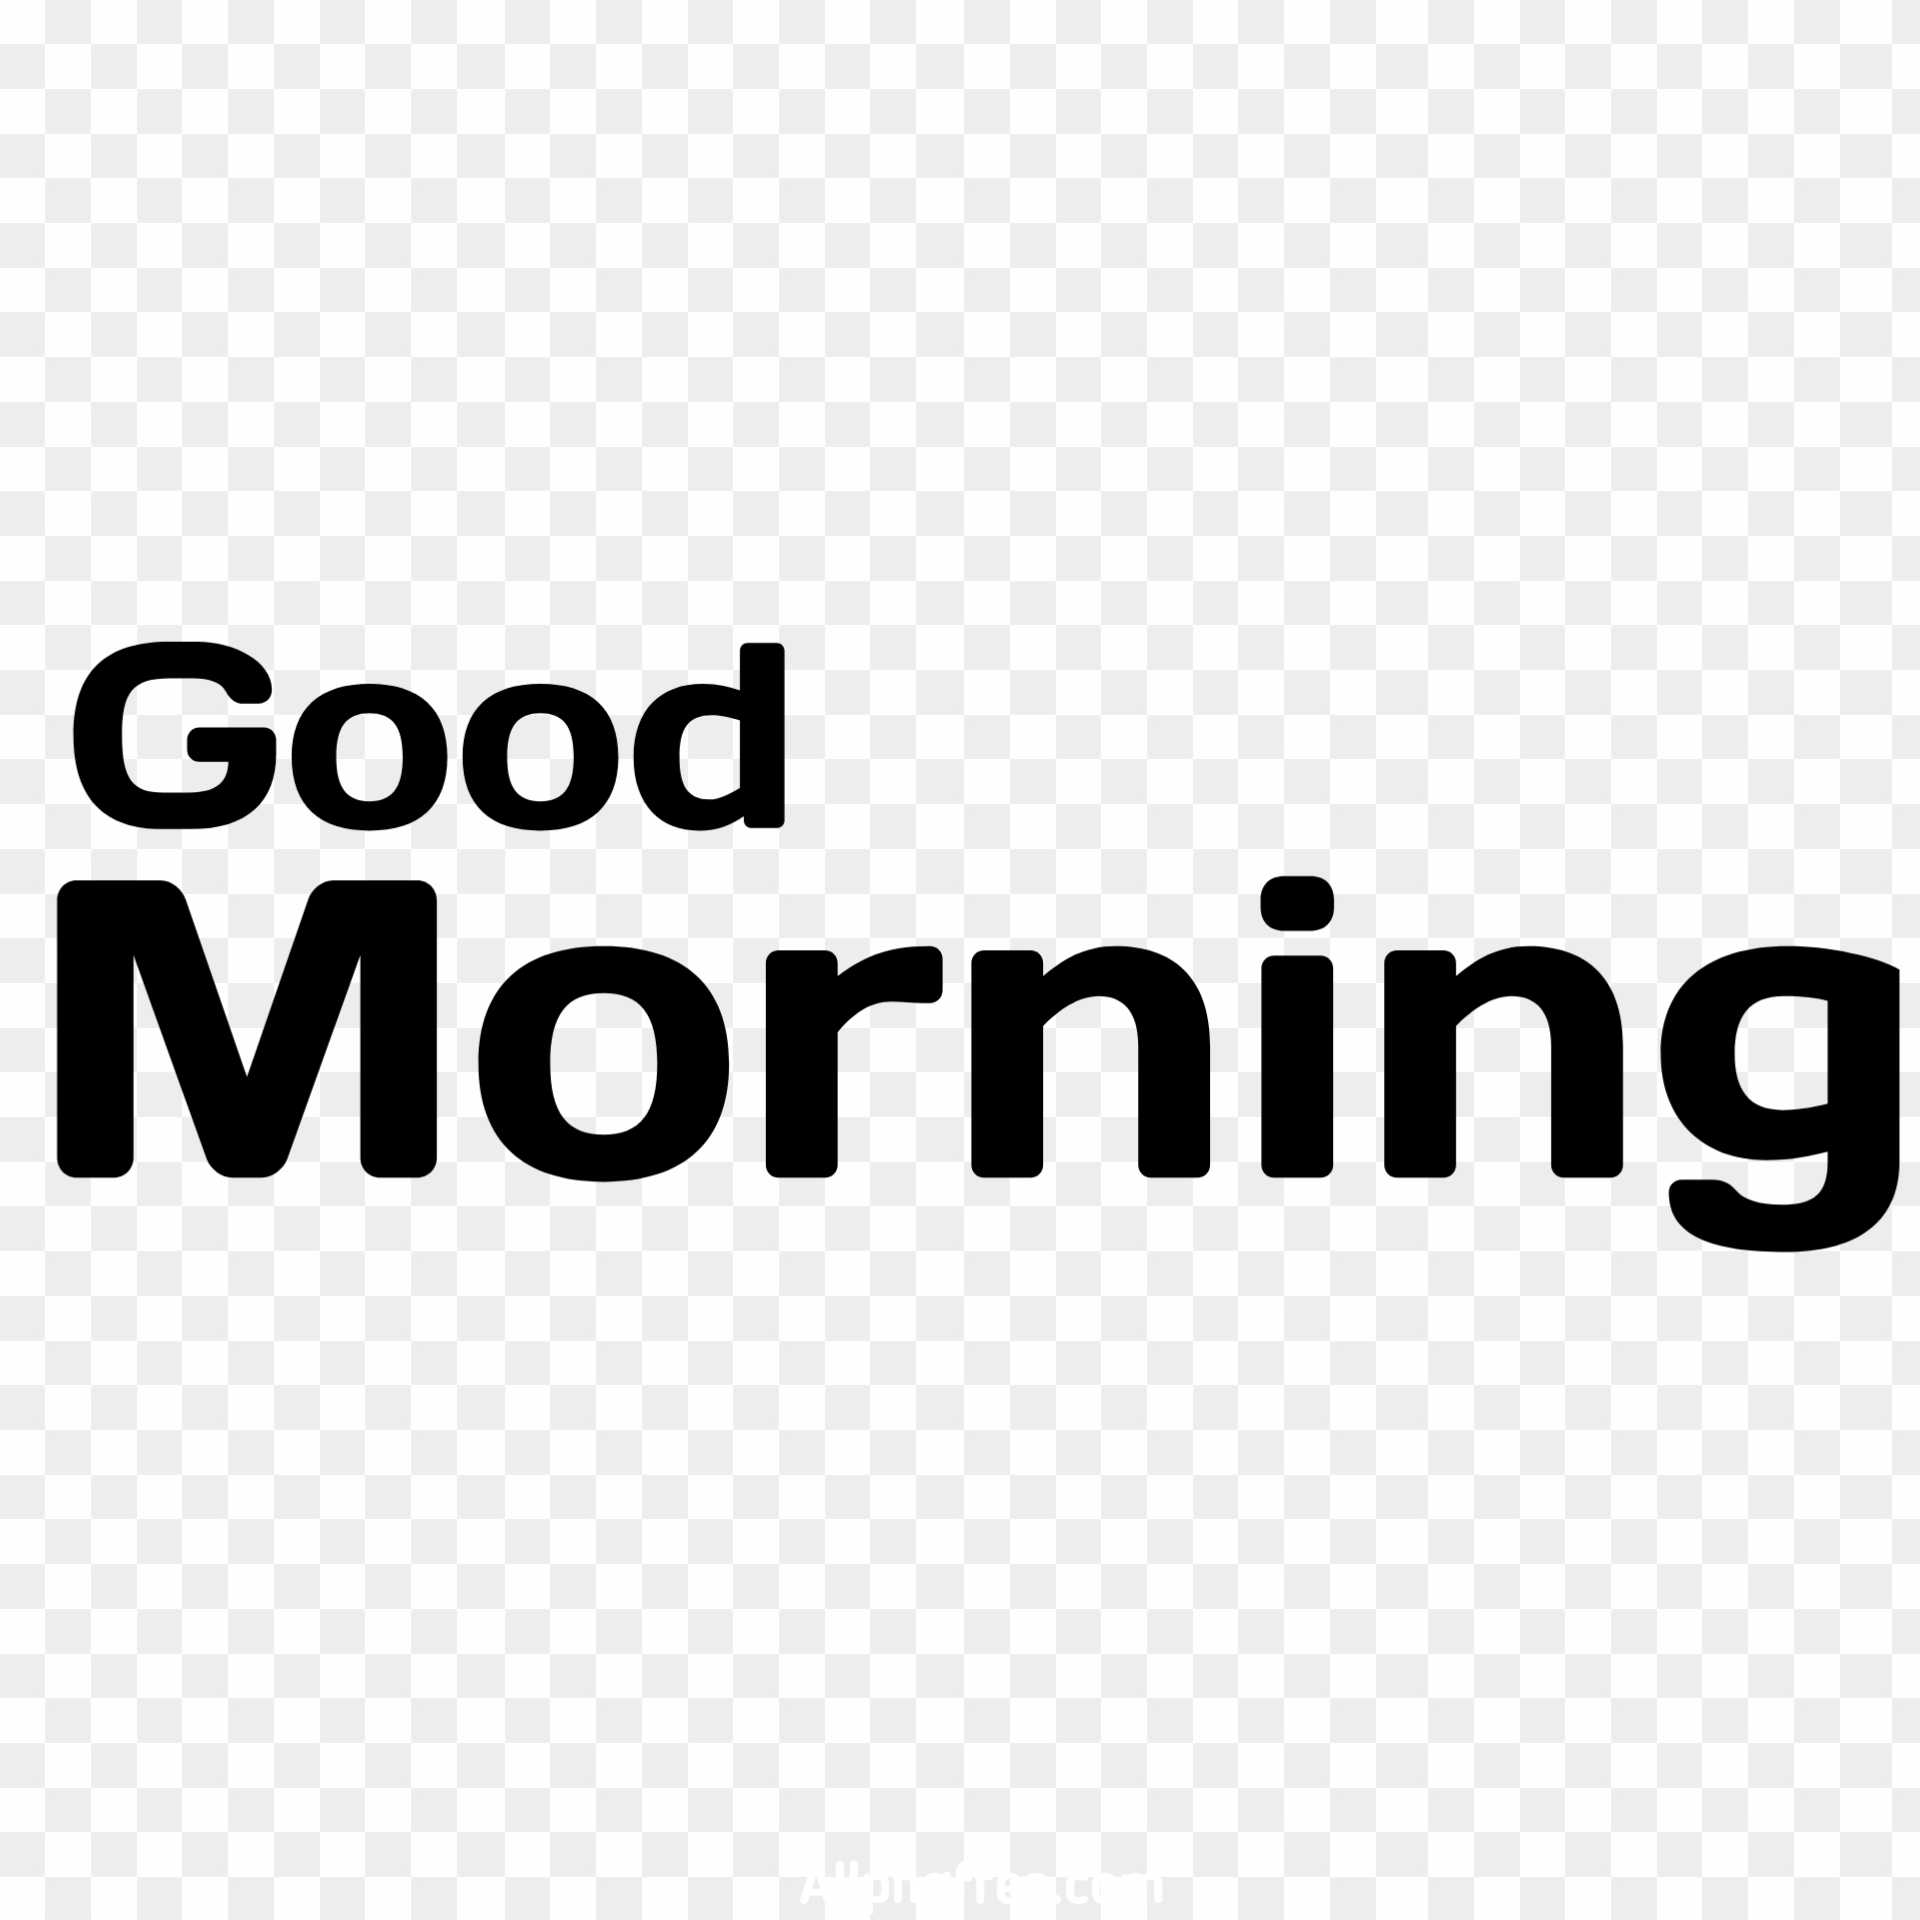 Good morning text PNG images